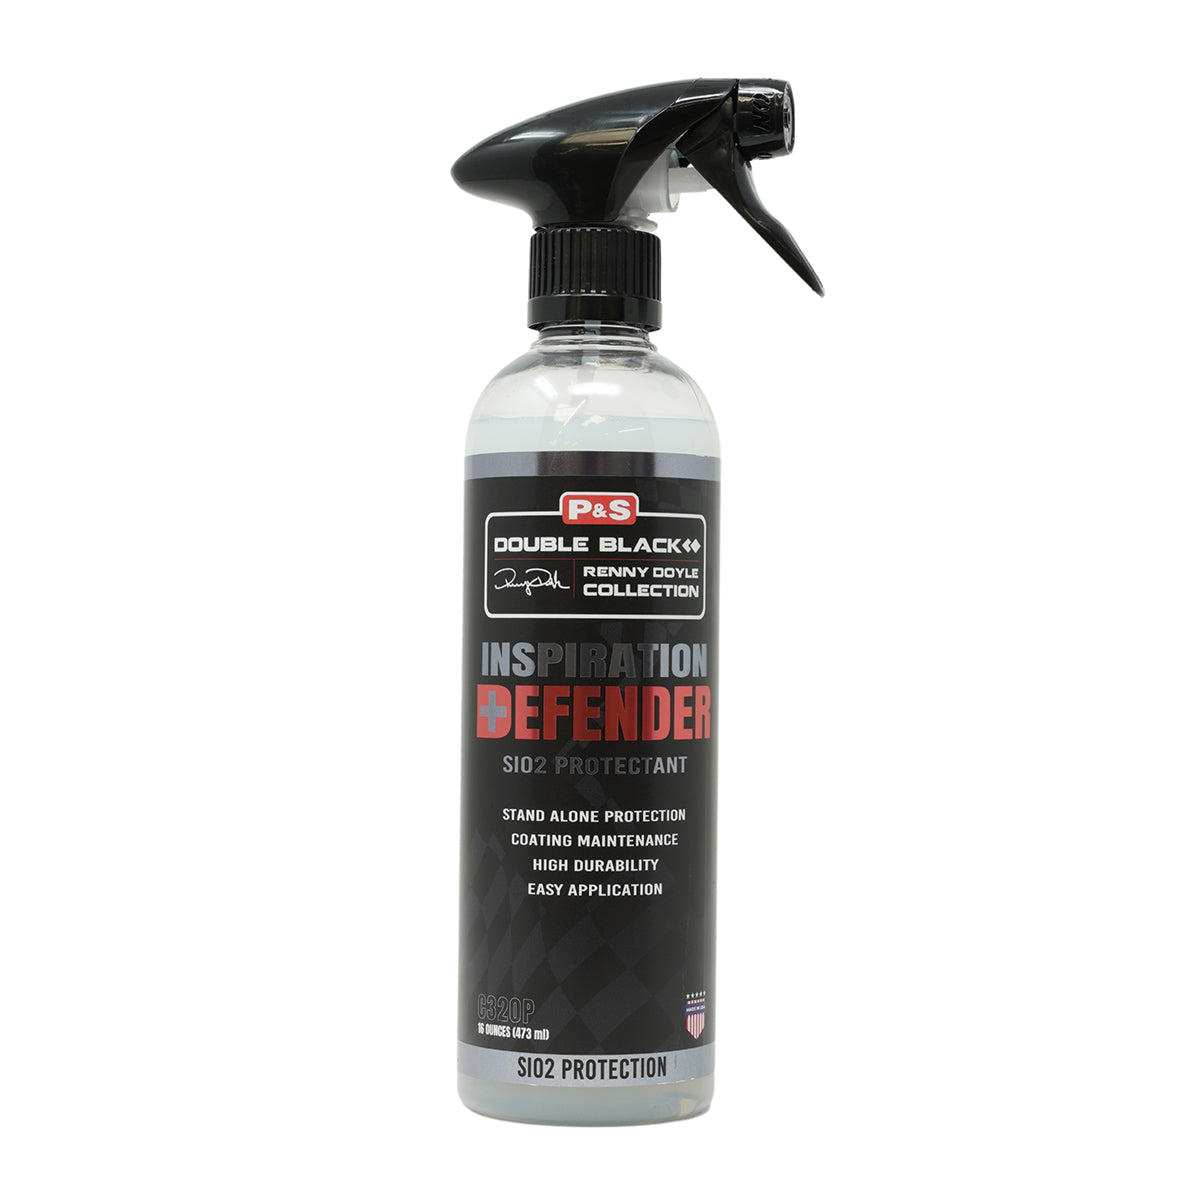 P&S Defender Si02 Protectant